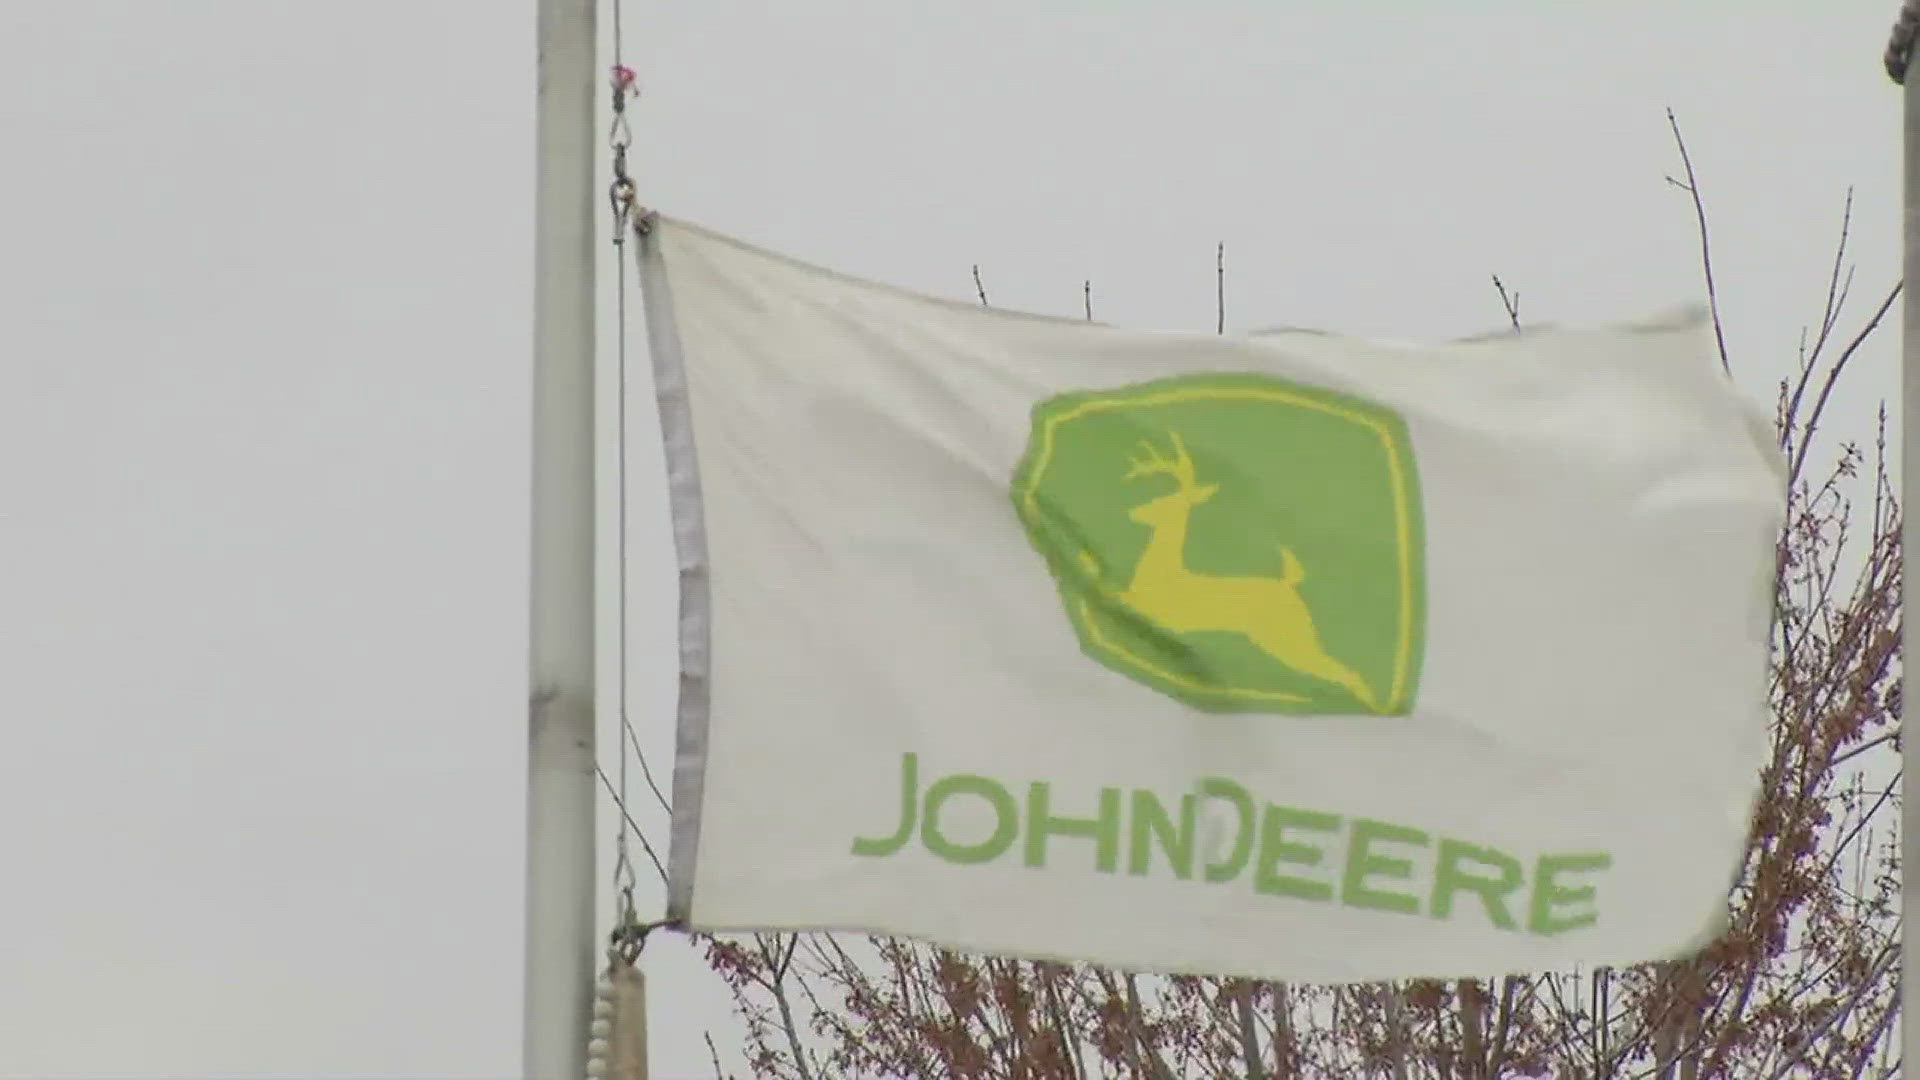 In the last three months, John Deere has laid off more than 1,000 employees across the company.